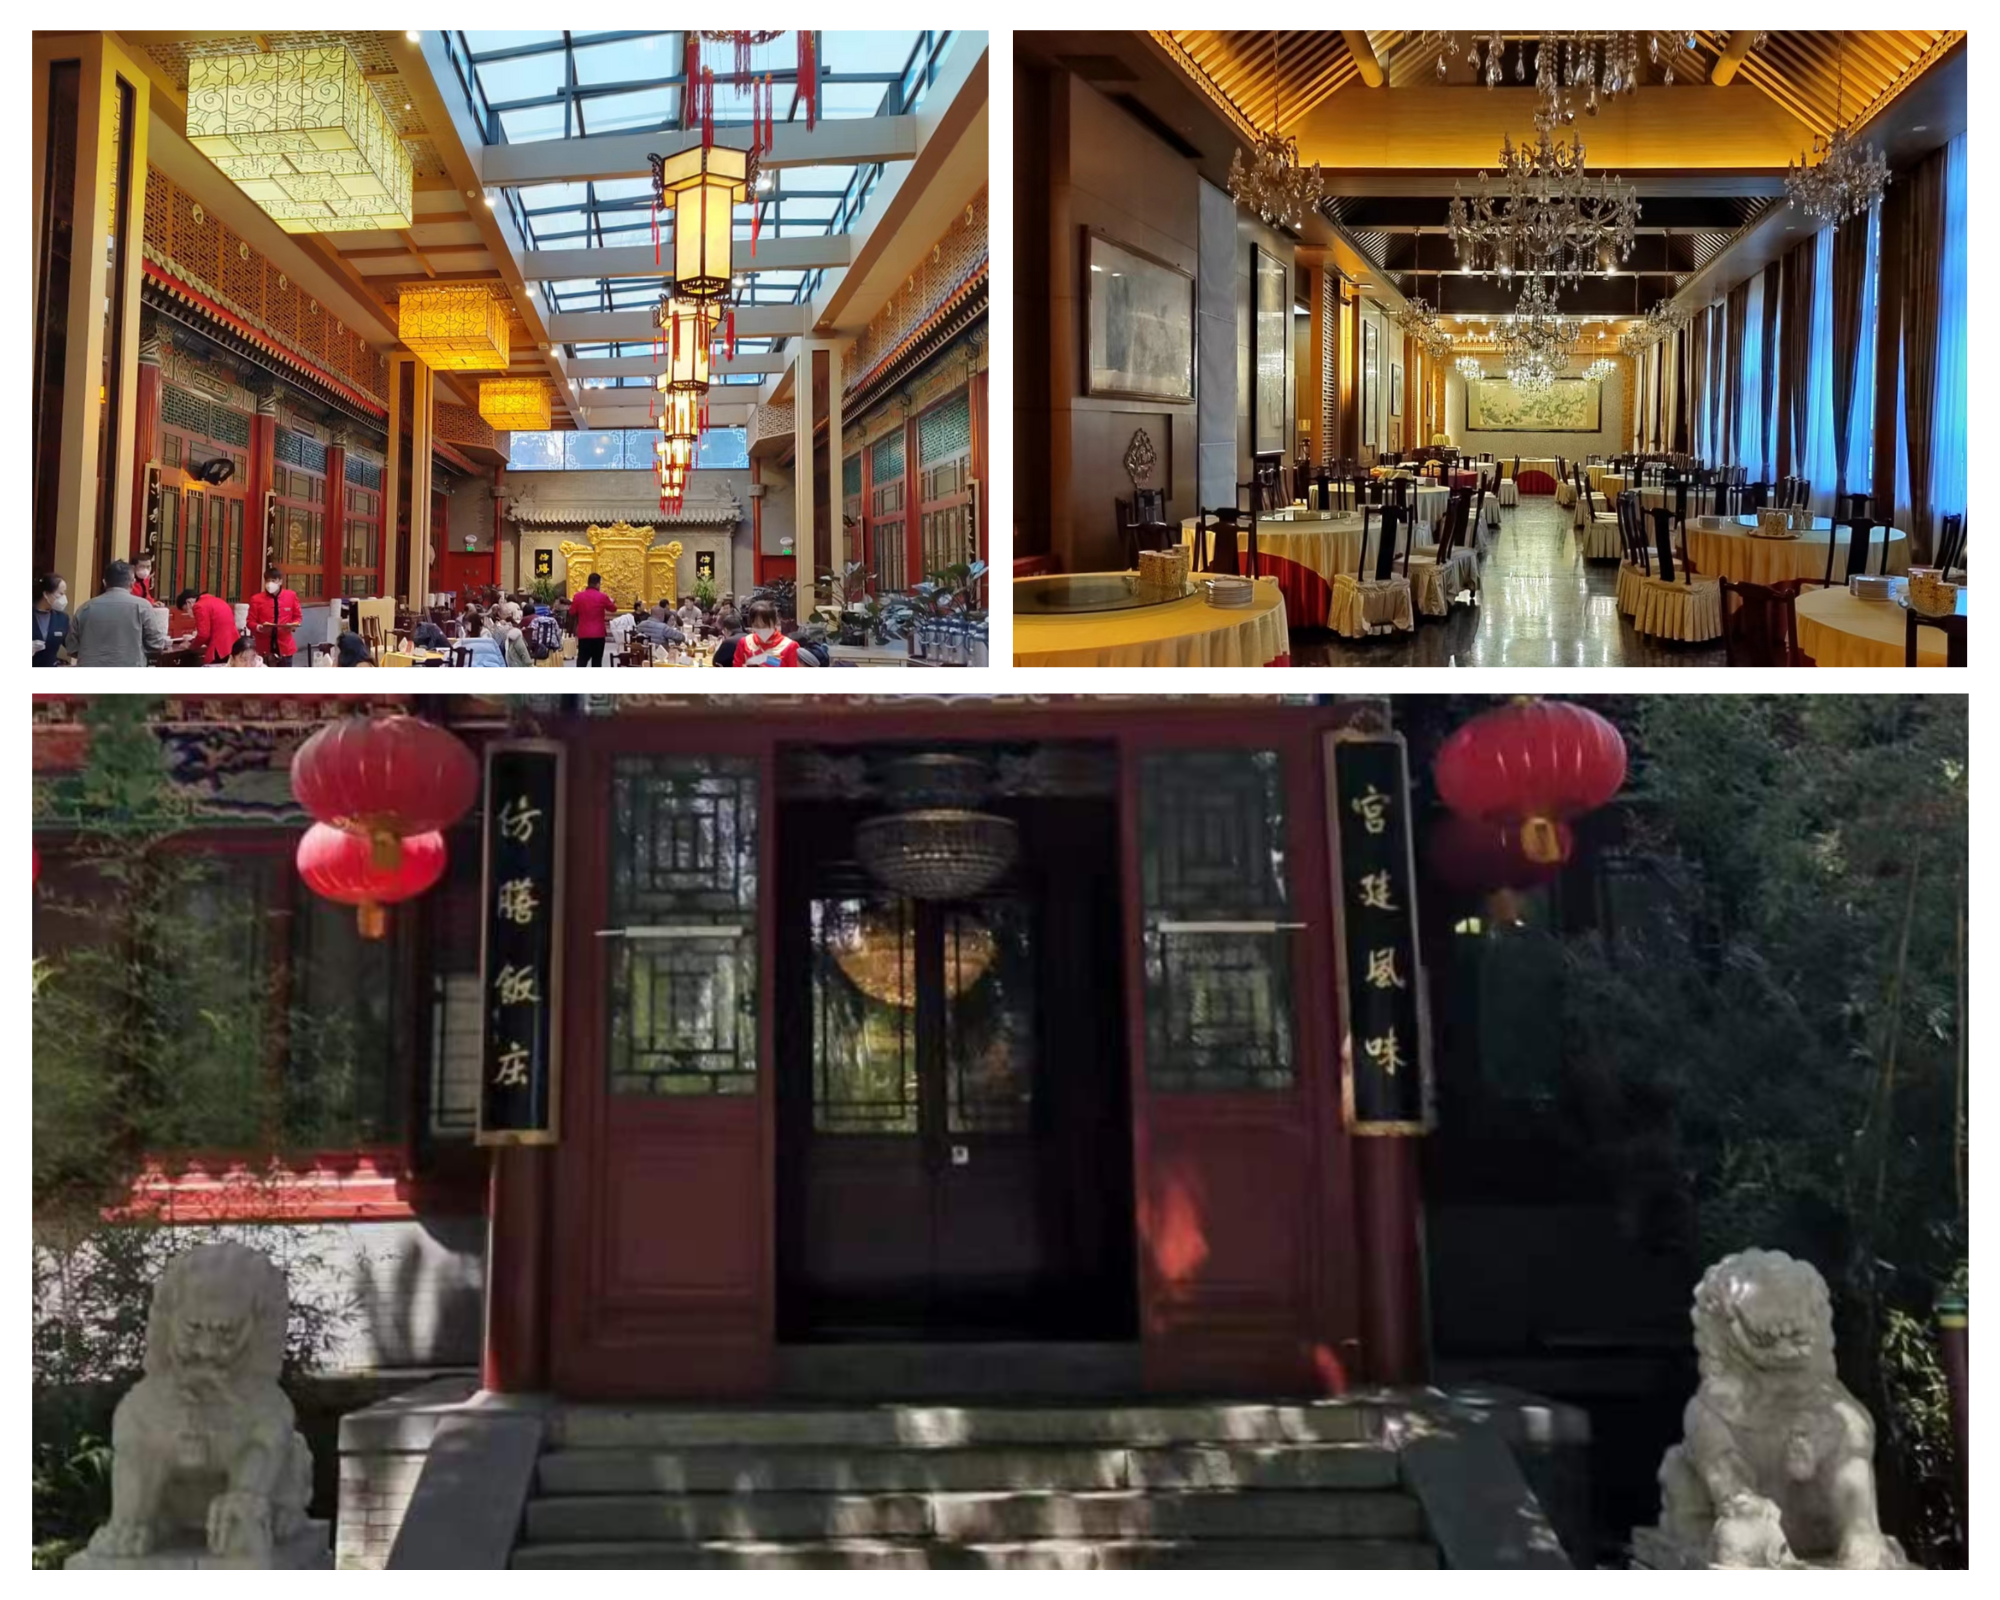 Views of the exterior of the restaurant, with fu dogs flanking the steps, and the interior which has gold lofted ceilings with red trim